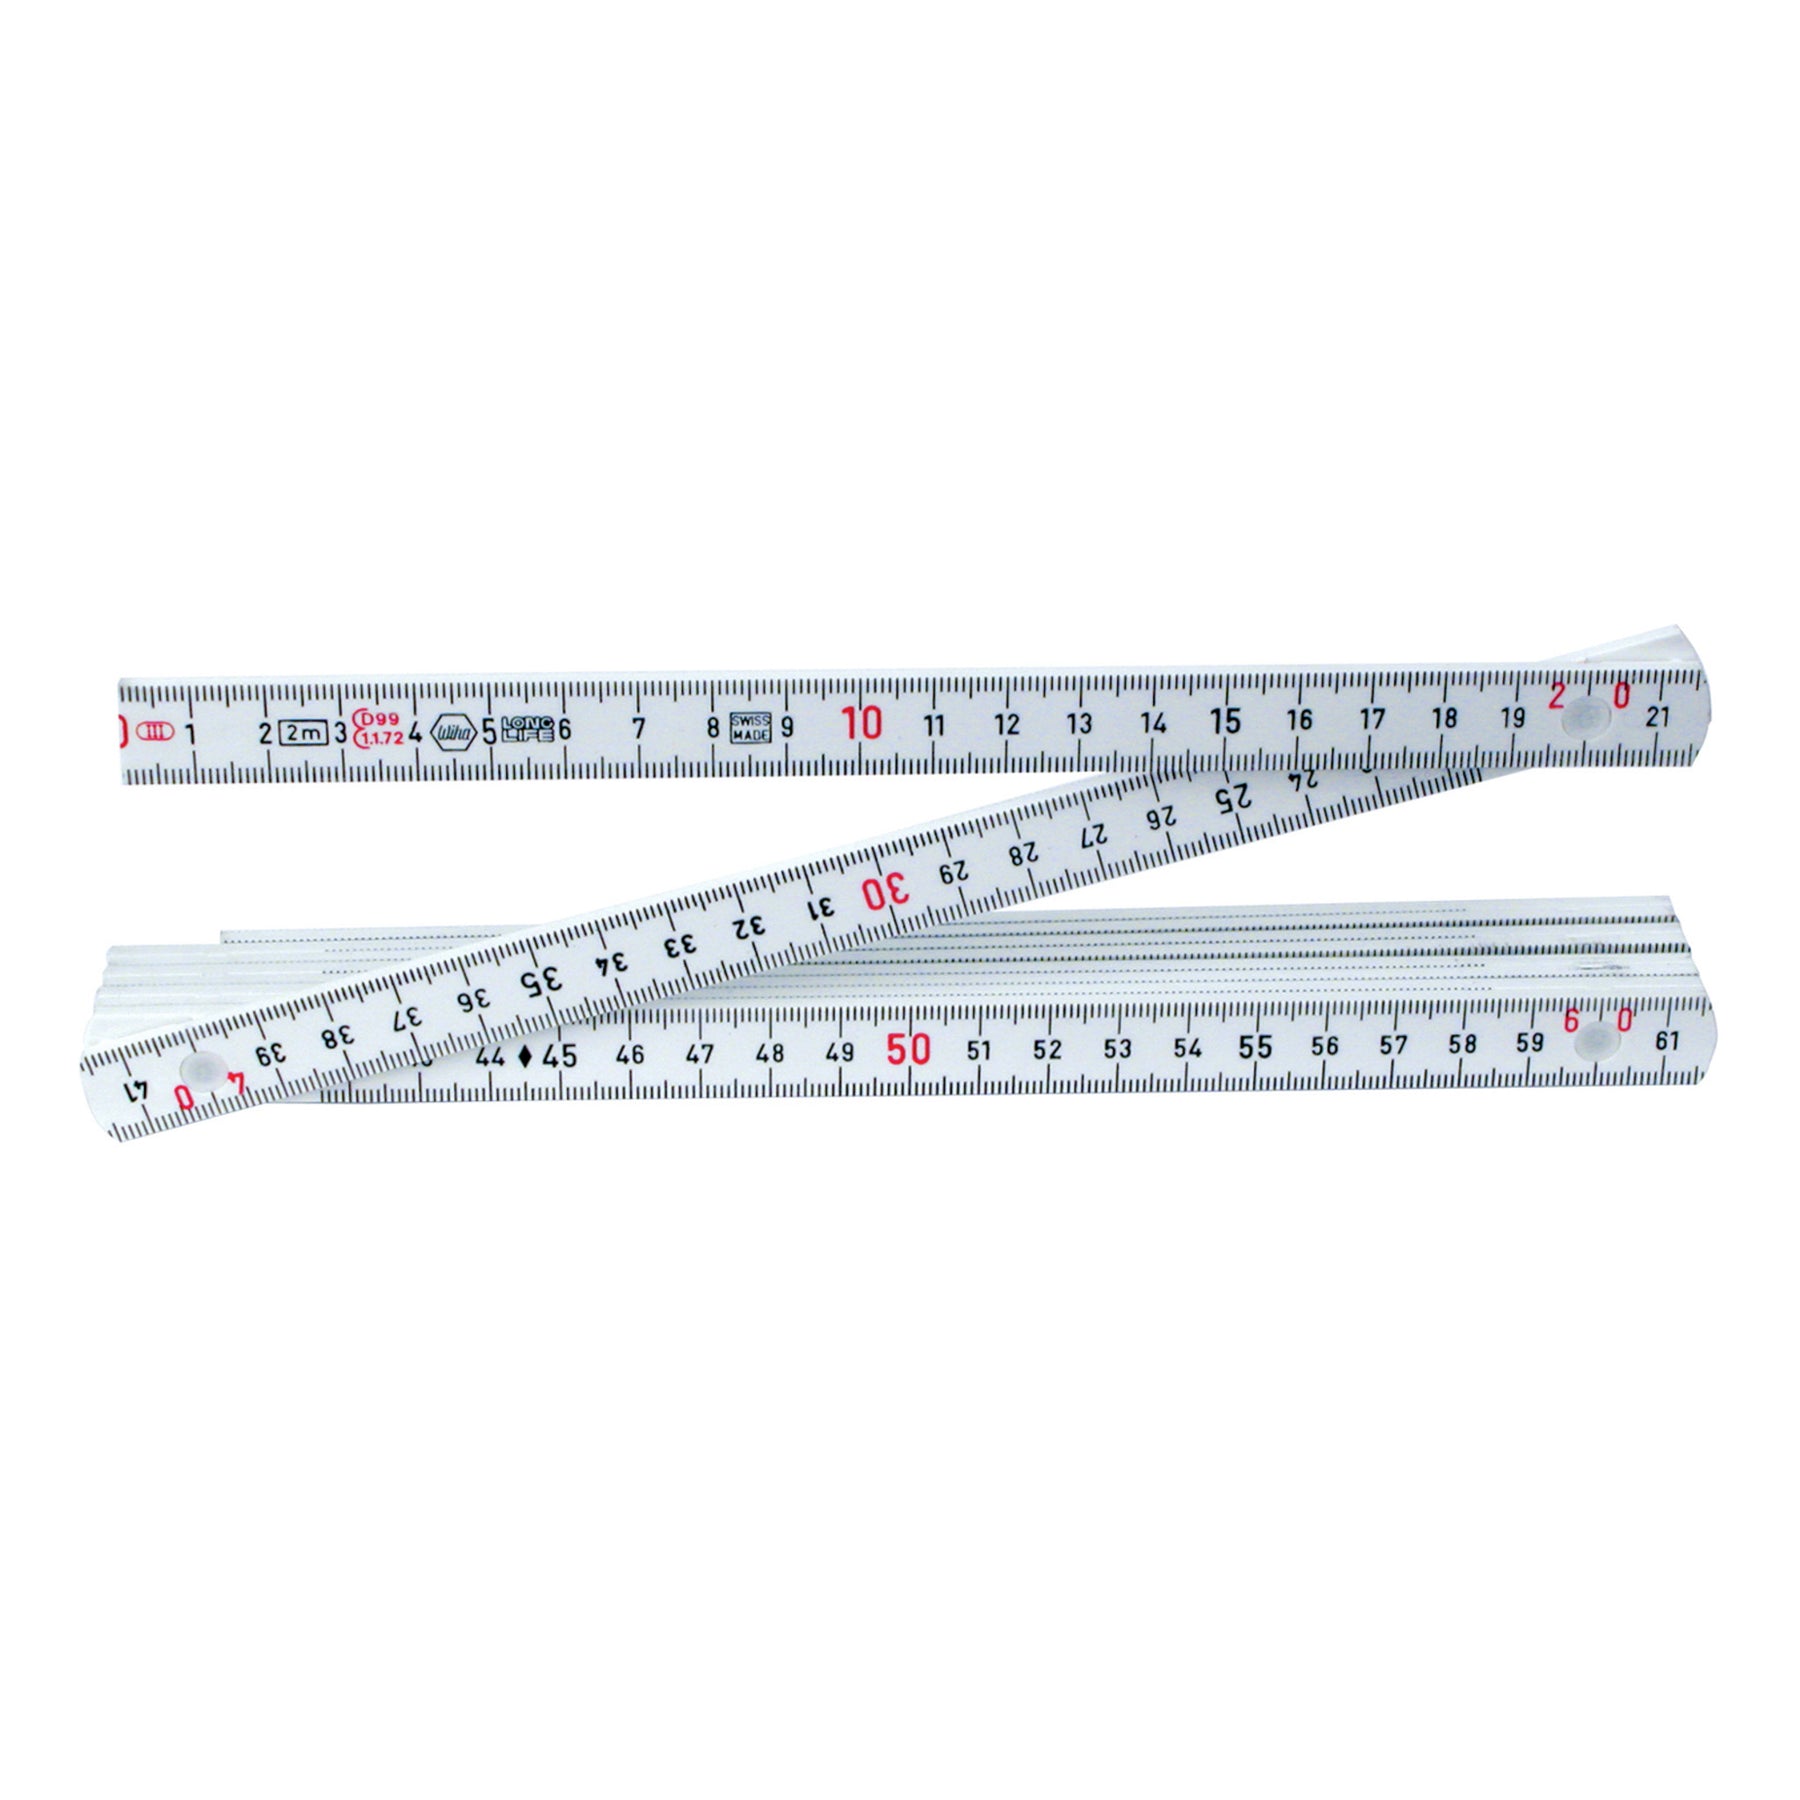 Insulated MaxiFlex Folding Ruler 6.5 Feet, Tested to 10,000 Volts AC and  Rated to 1,000 Volts AC